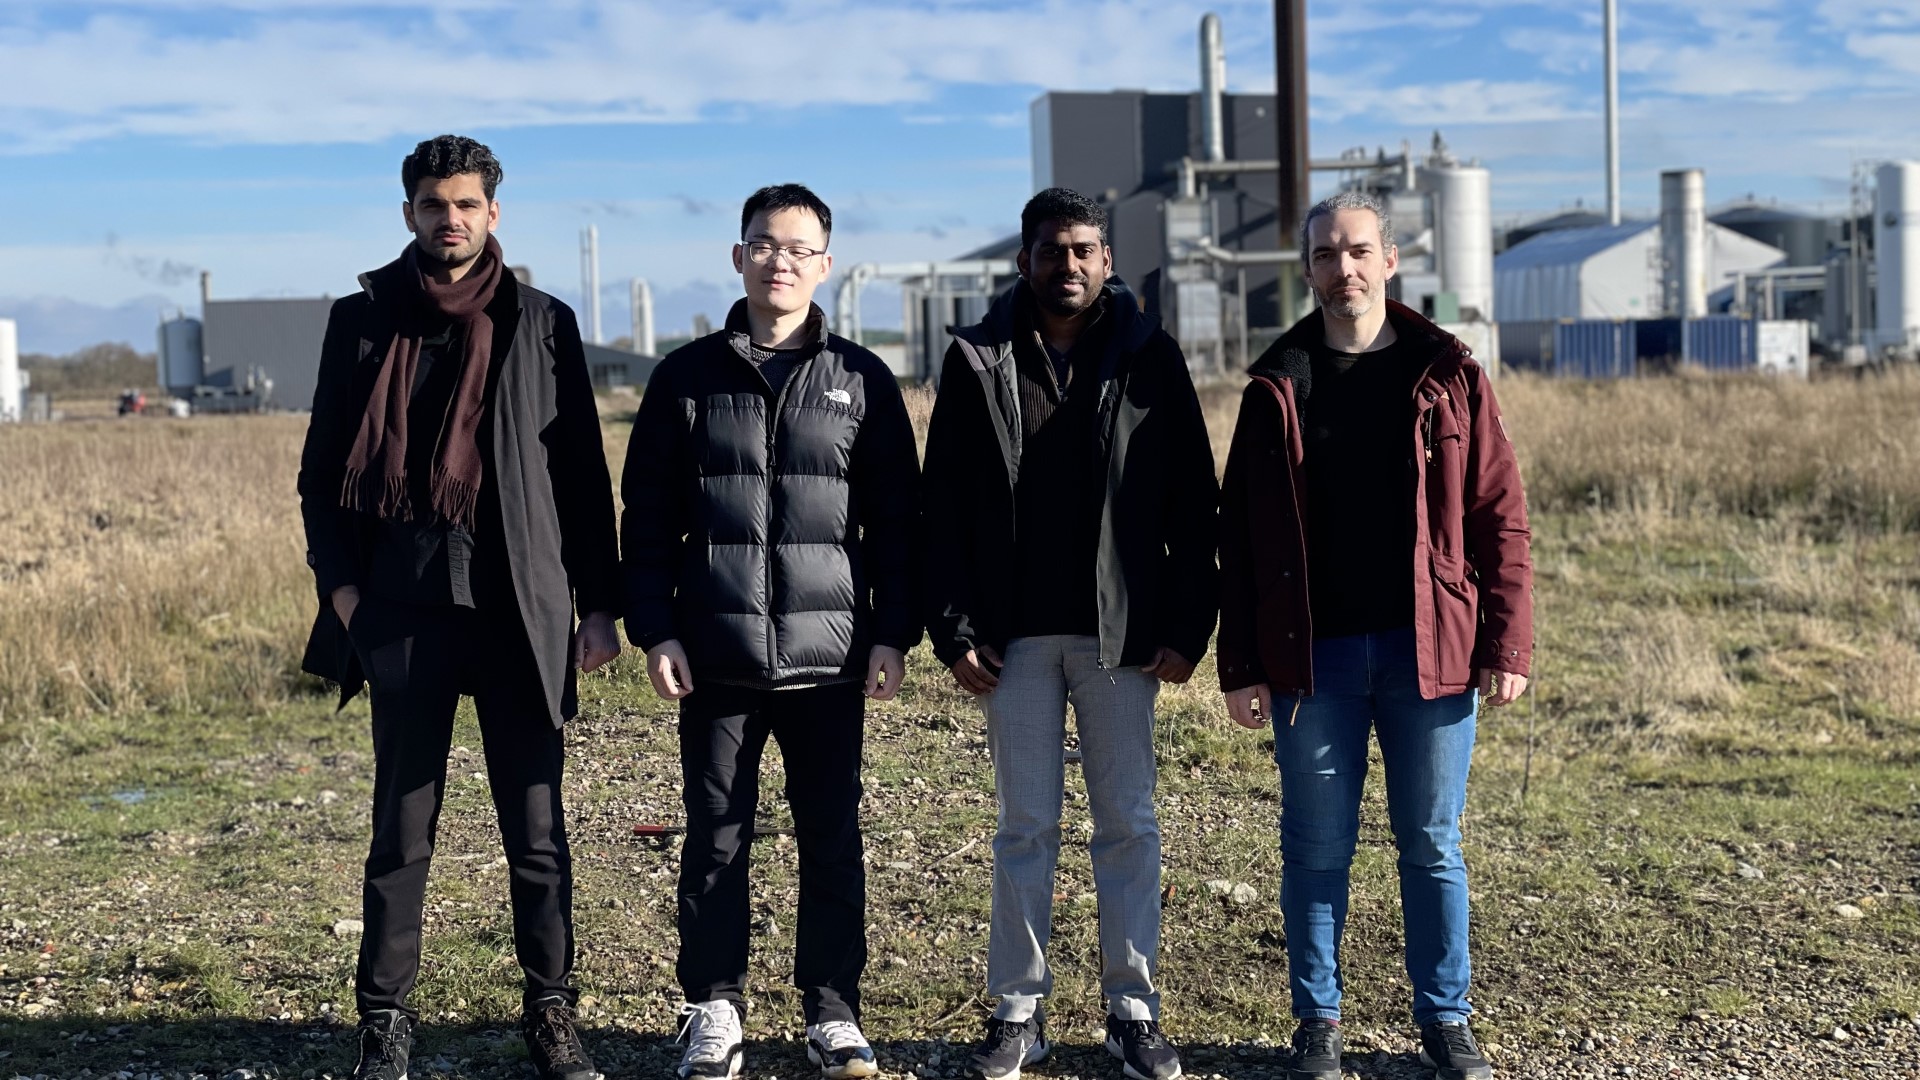 Researchers at DTU, Bilal Siddique Khan (left) and Tao Jiang (2. from left), make up half of the newly launched international fellowship programme.